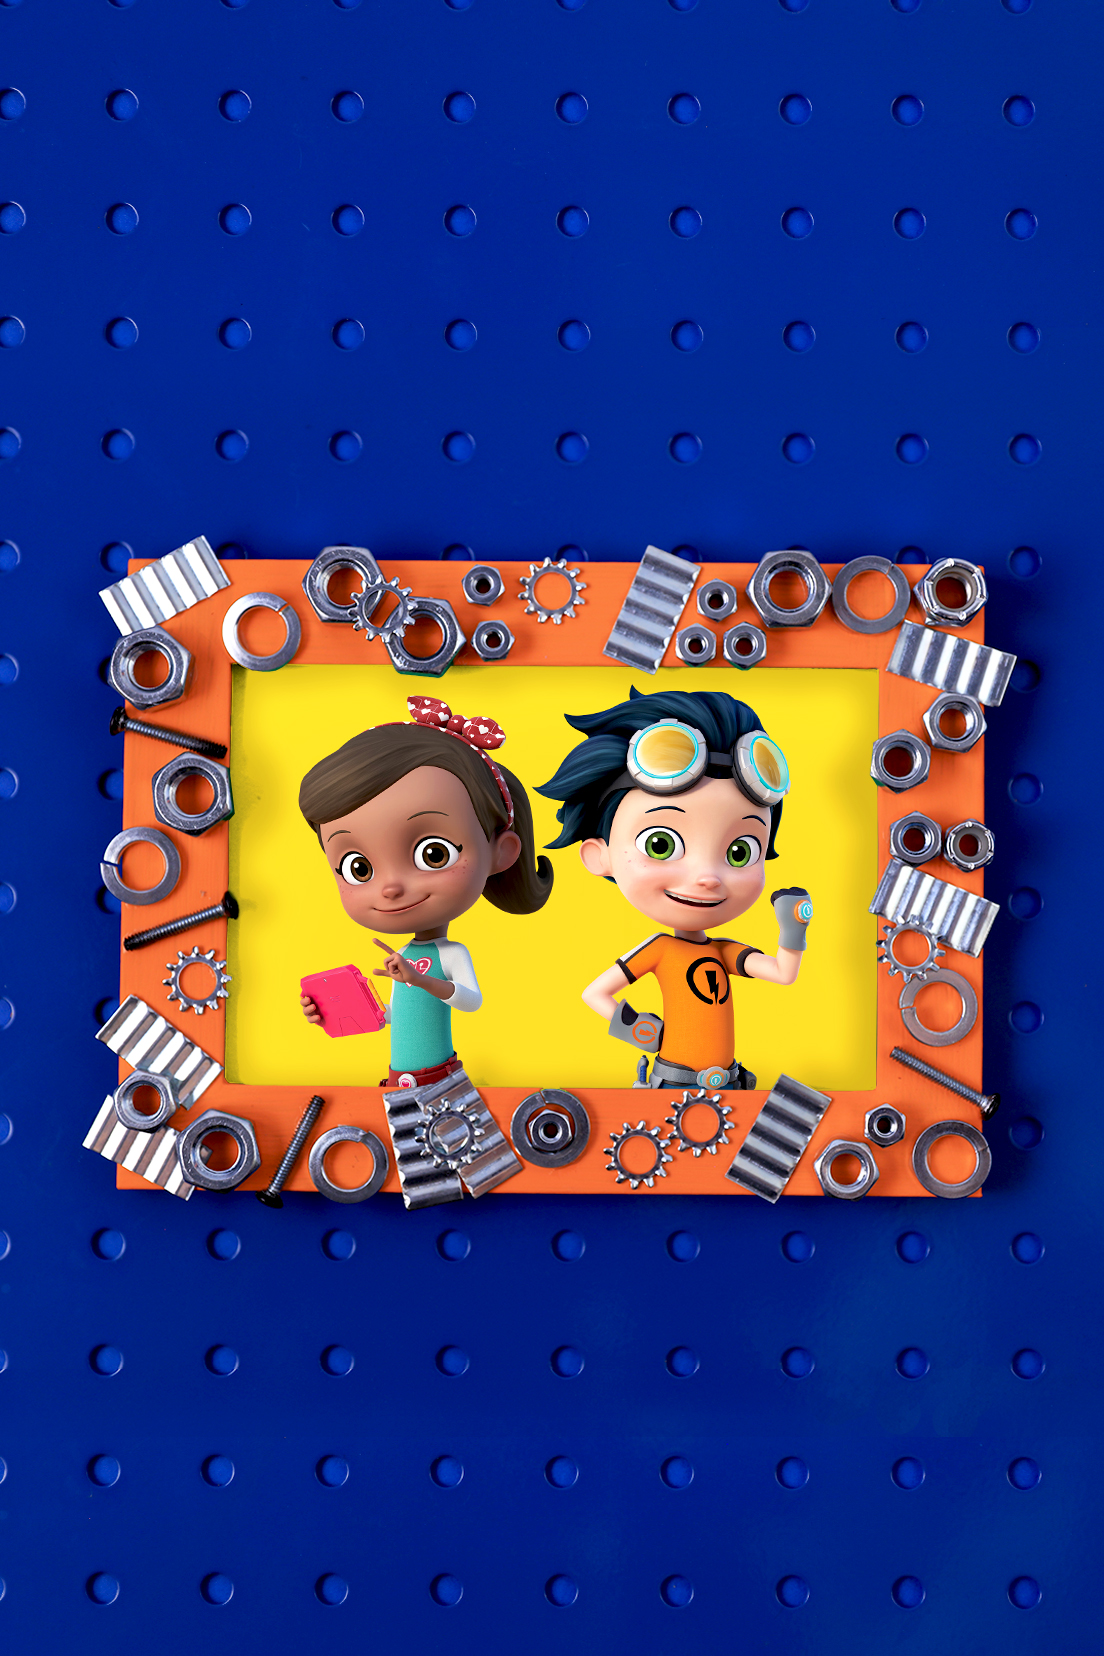 Rusty Rivets Father's Day Picture Frame